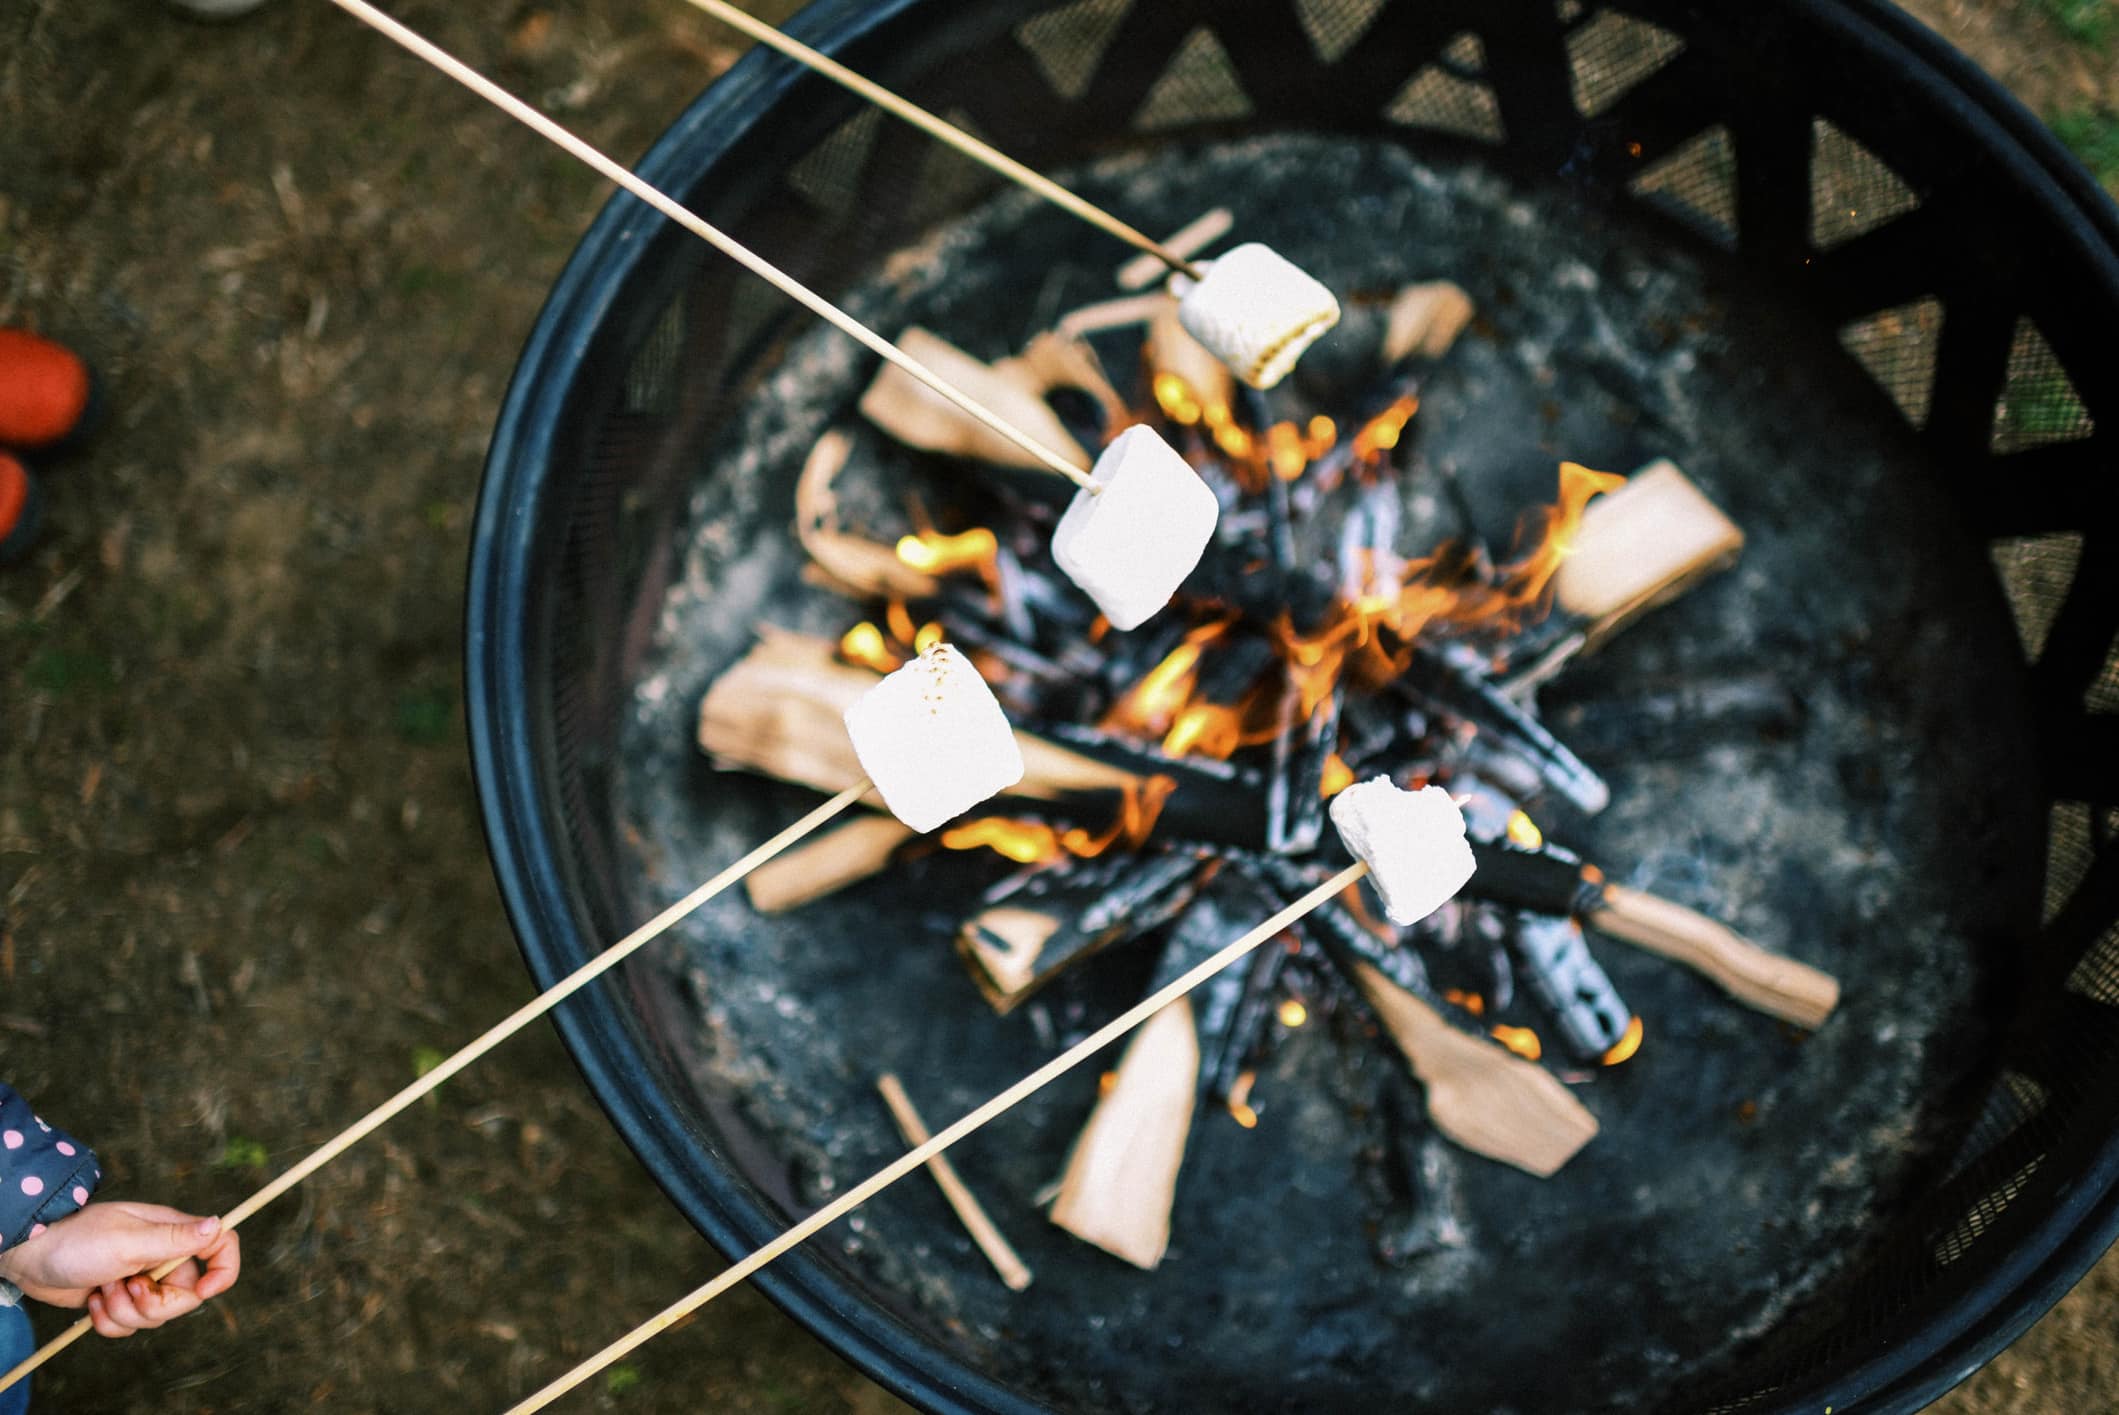 birds view angle of bonfire and roasting marshmallows for s'mores